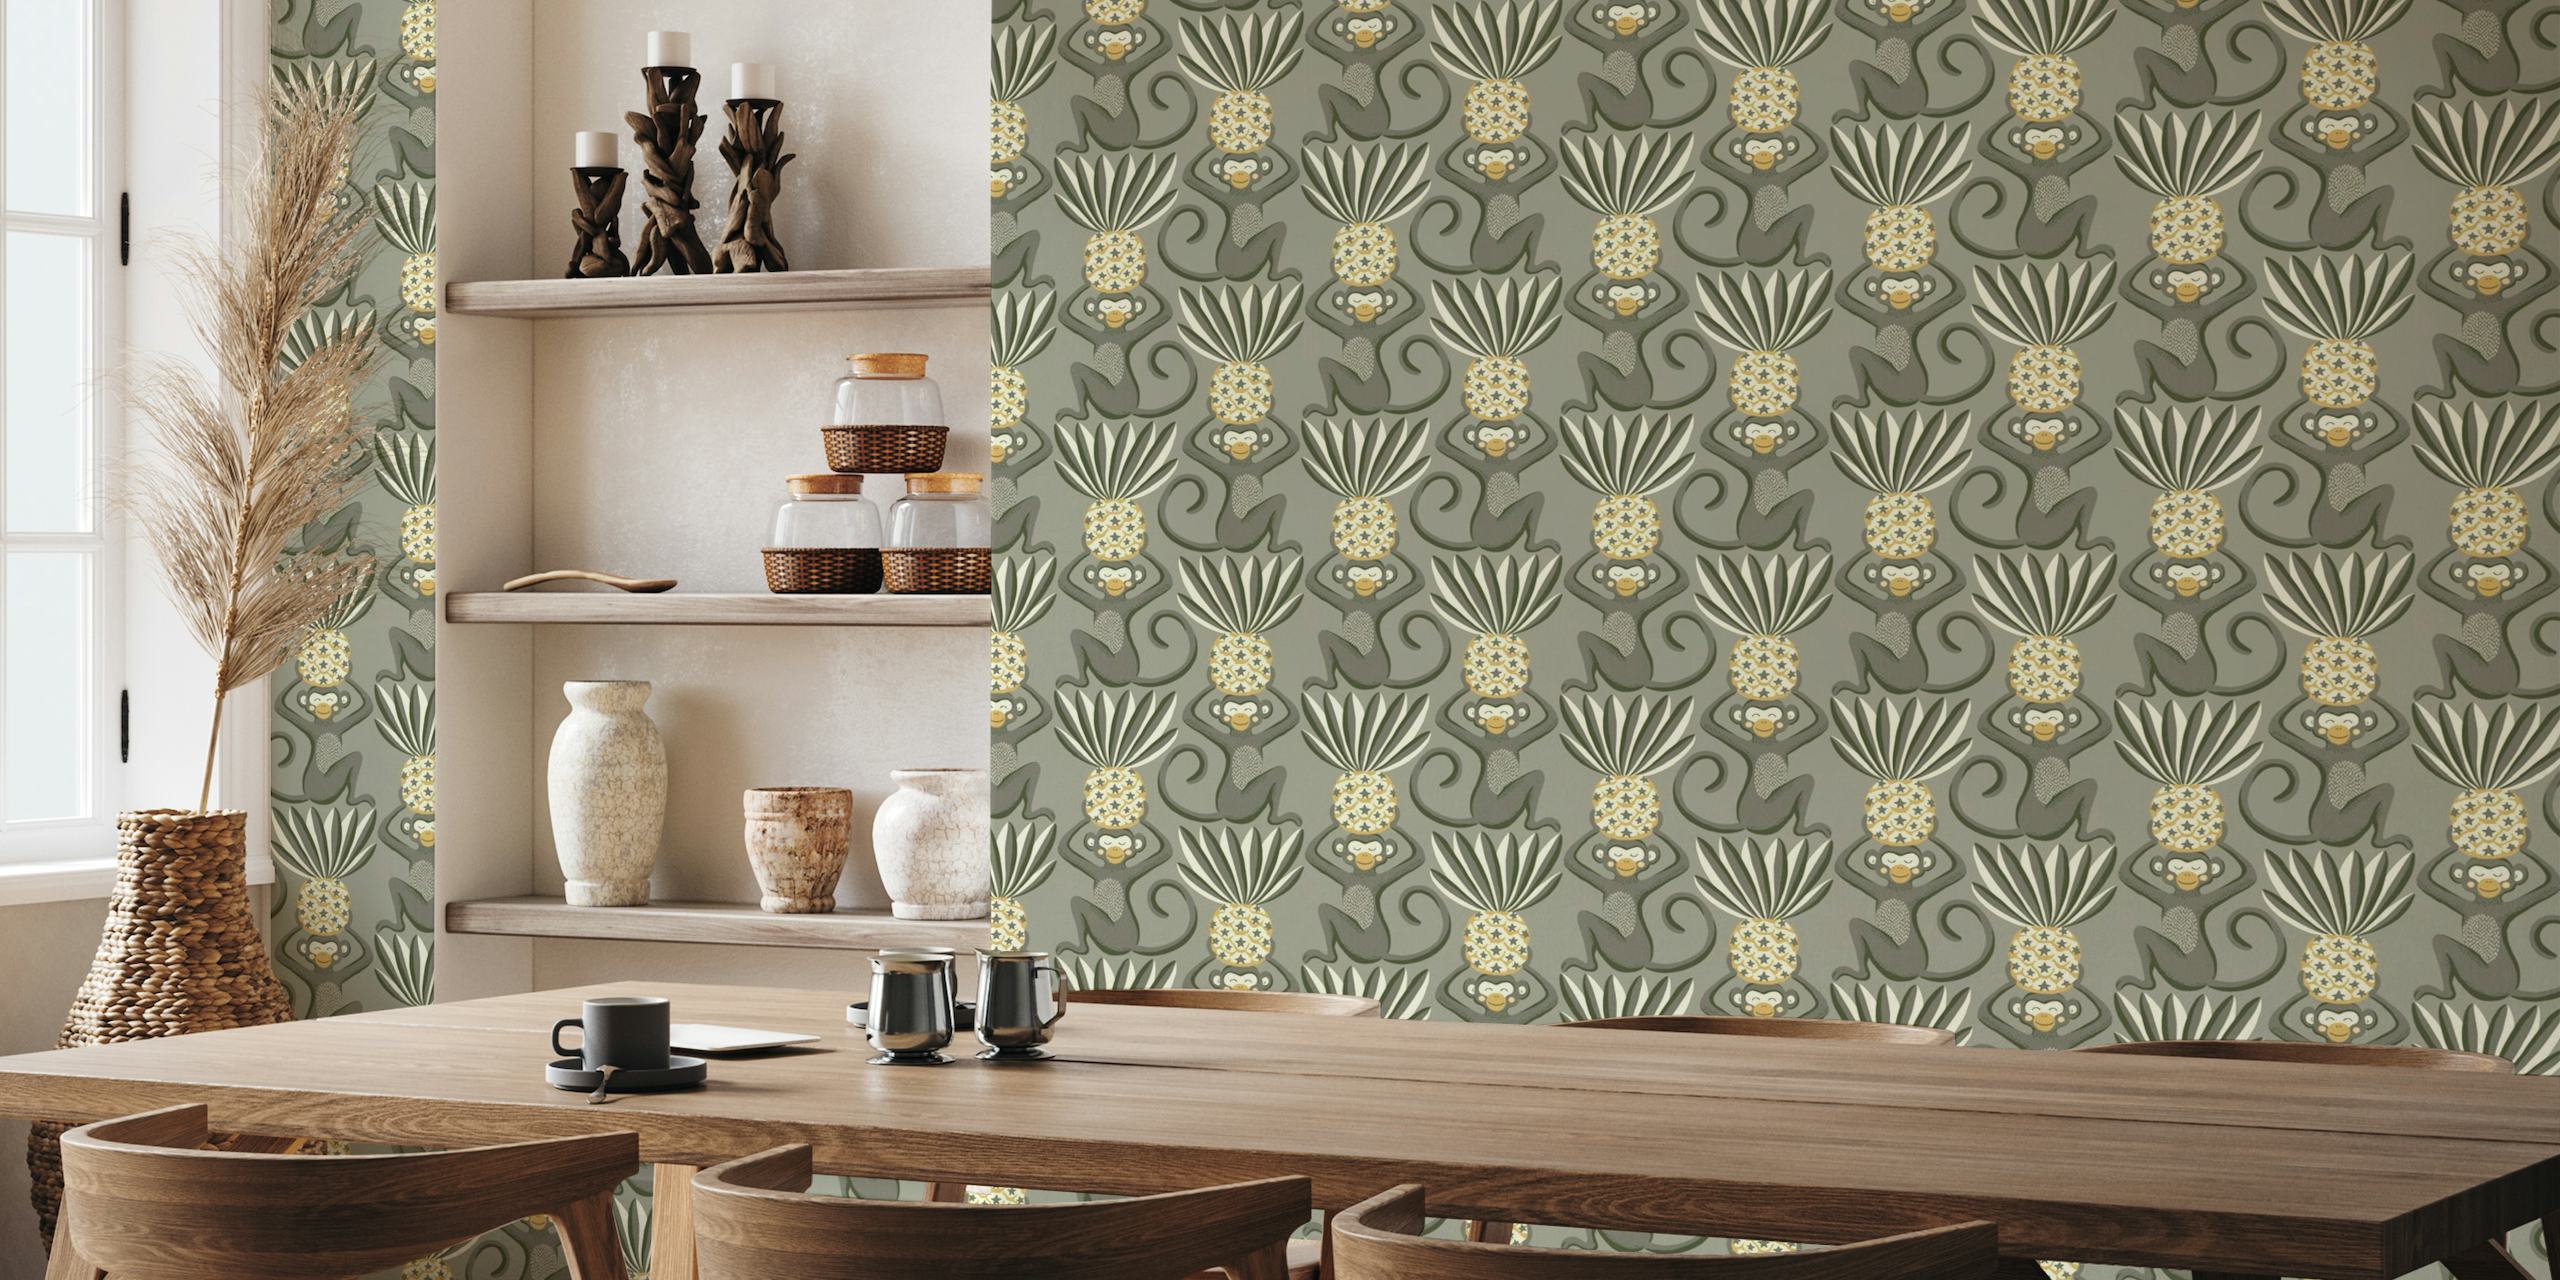 Whimsical wall mural with playful monkeys and stylized pineapples in brown and yellow tones